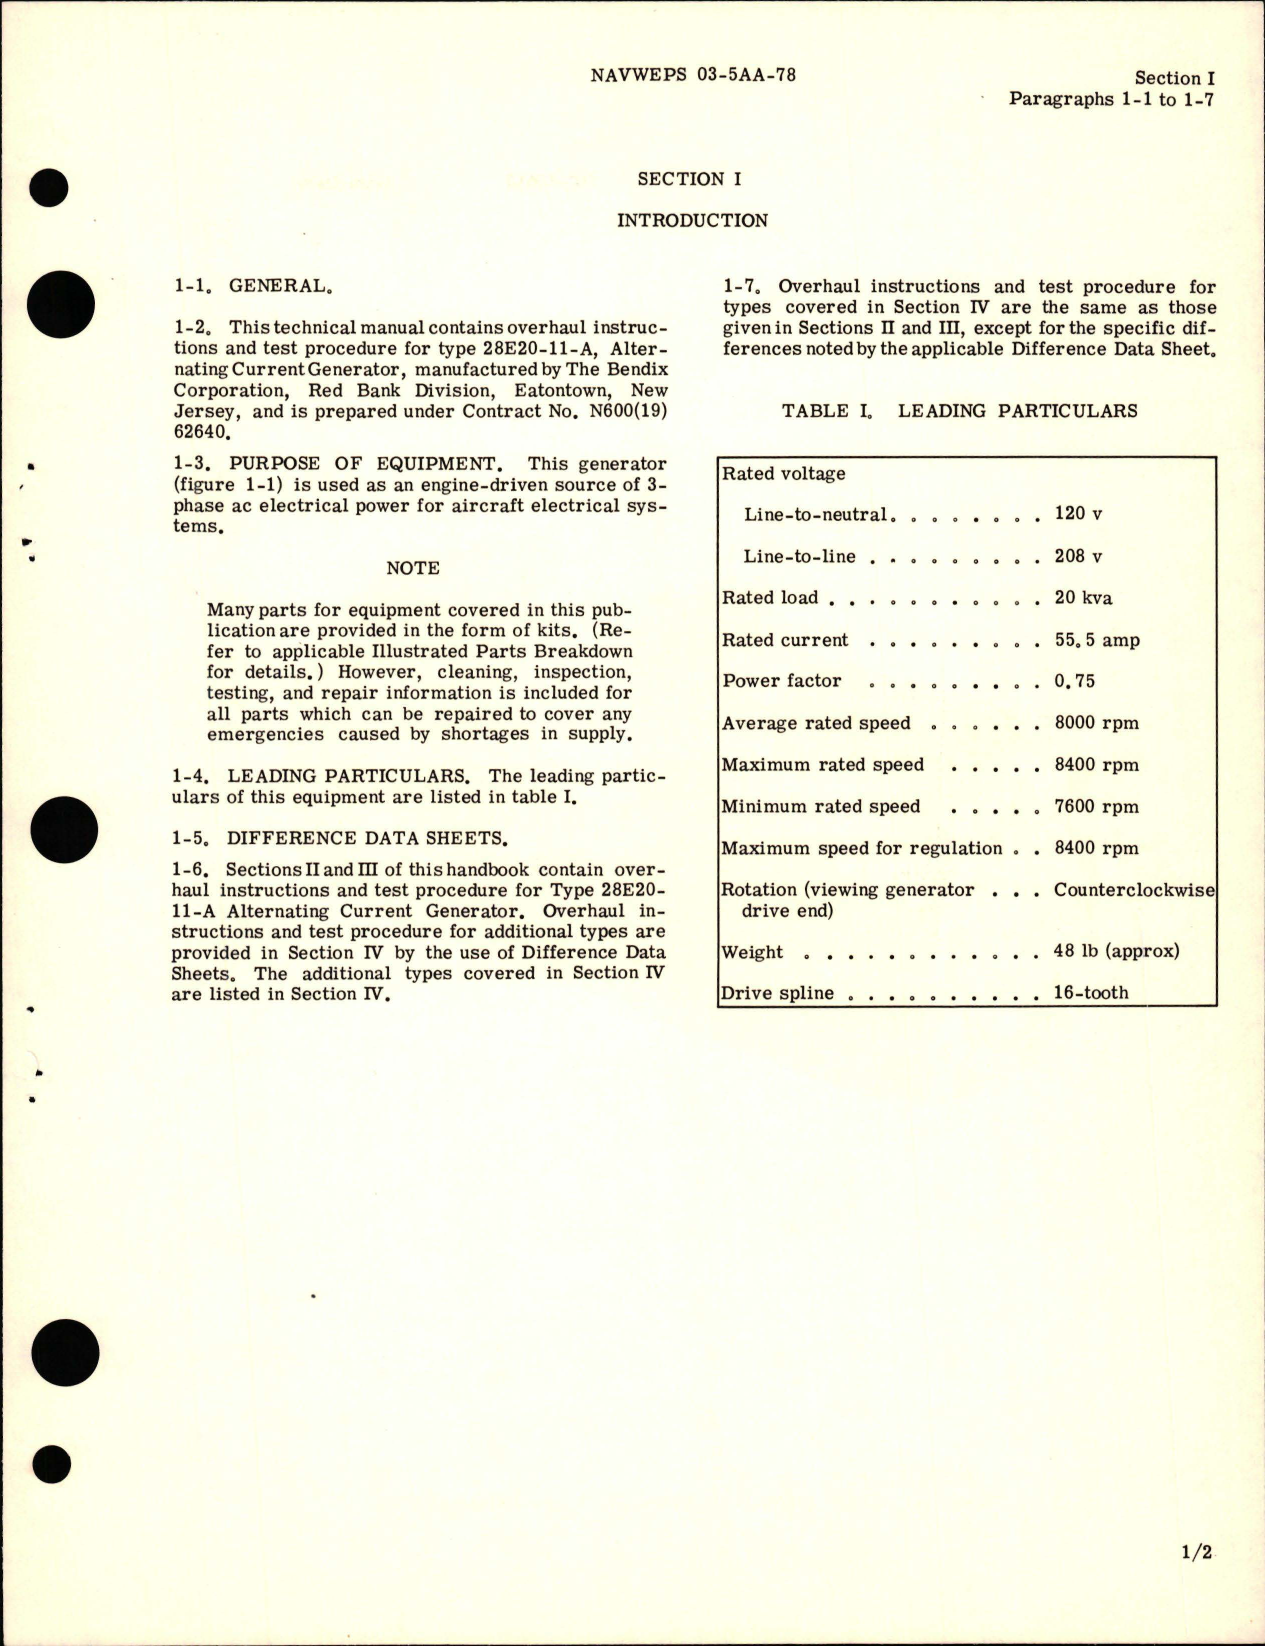 Sample page 5 from AirCorps Library document: Overhaul Instructions for Alternating Current Generator